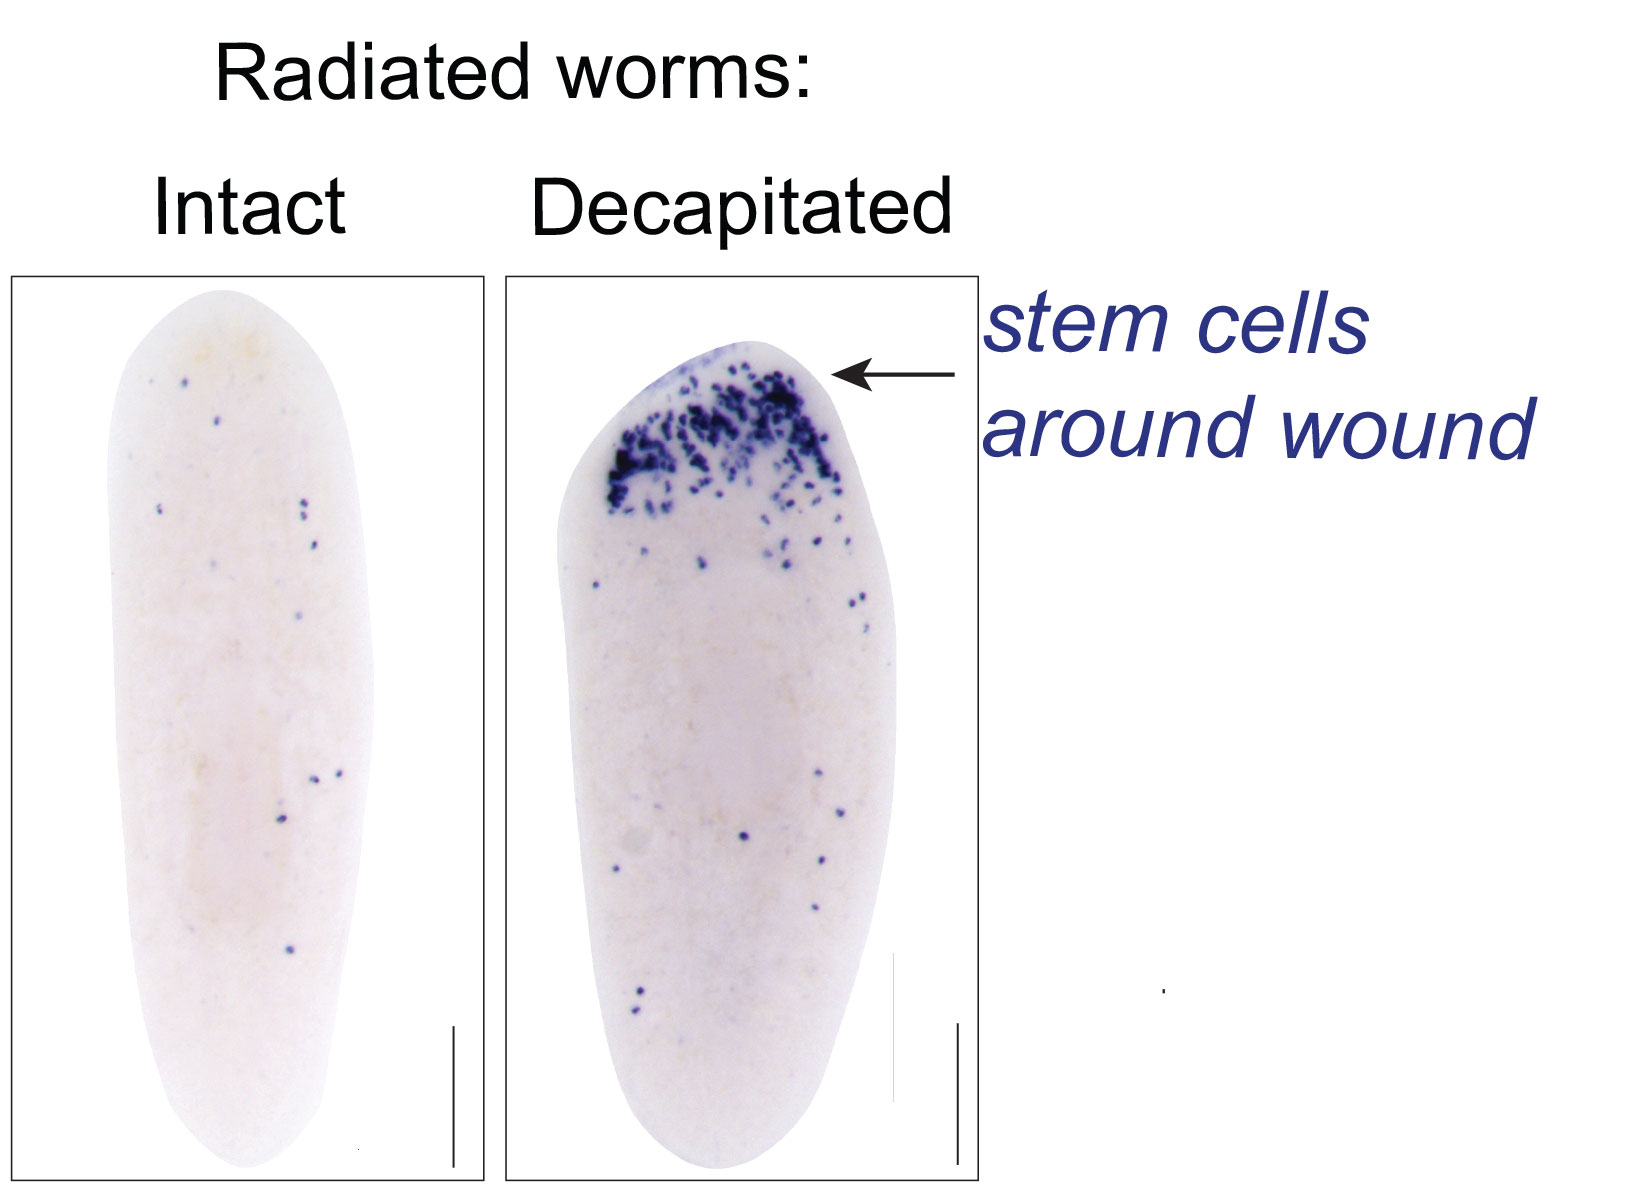 Main result from the publication that shows stem cells gathering around the site of injury